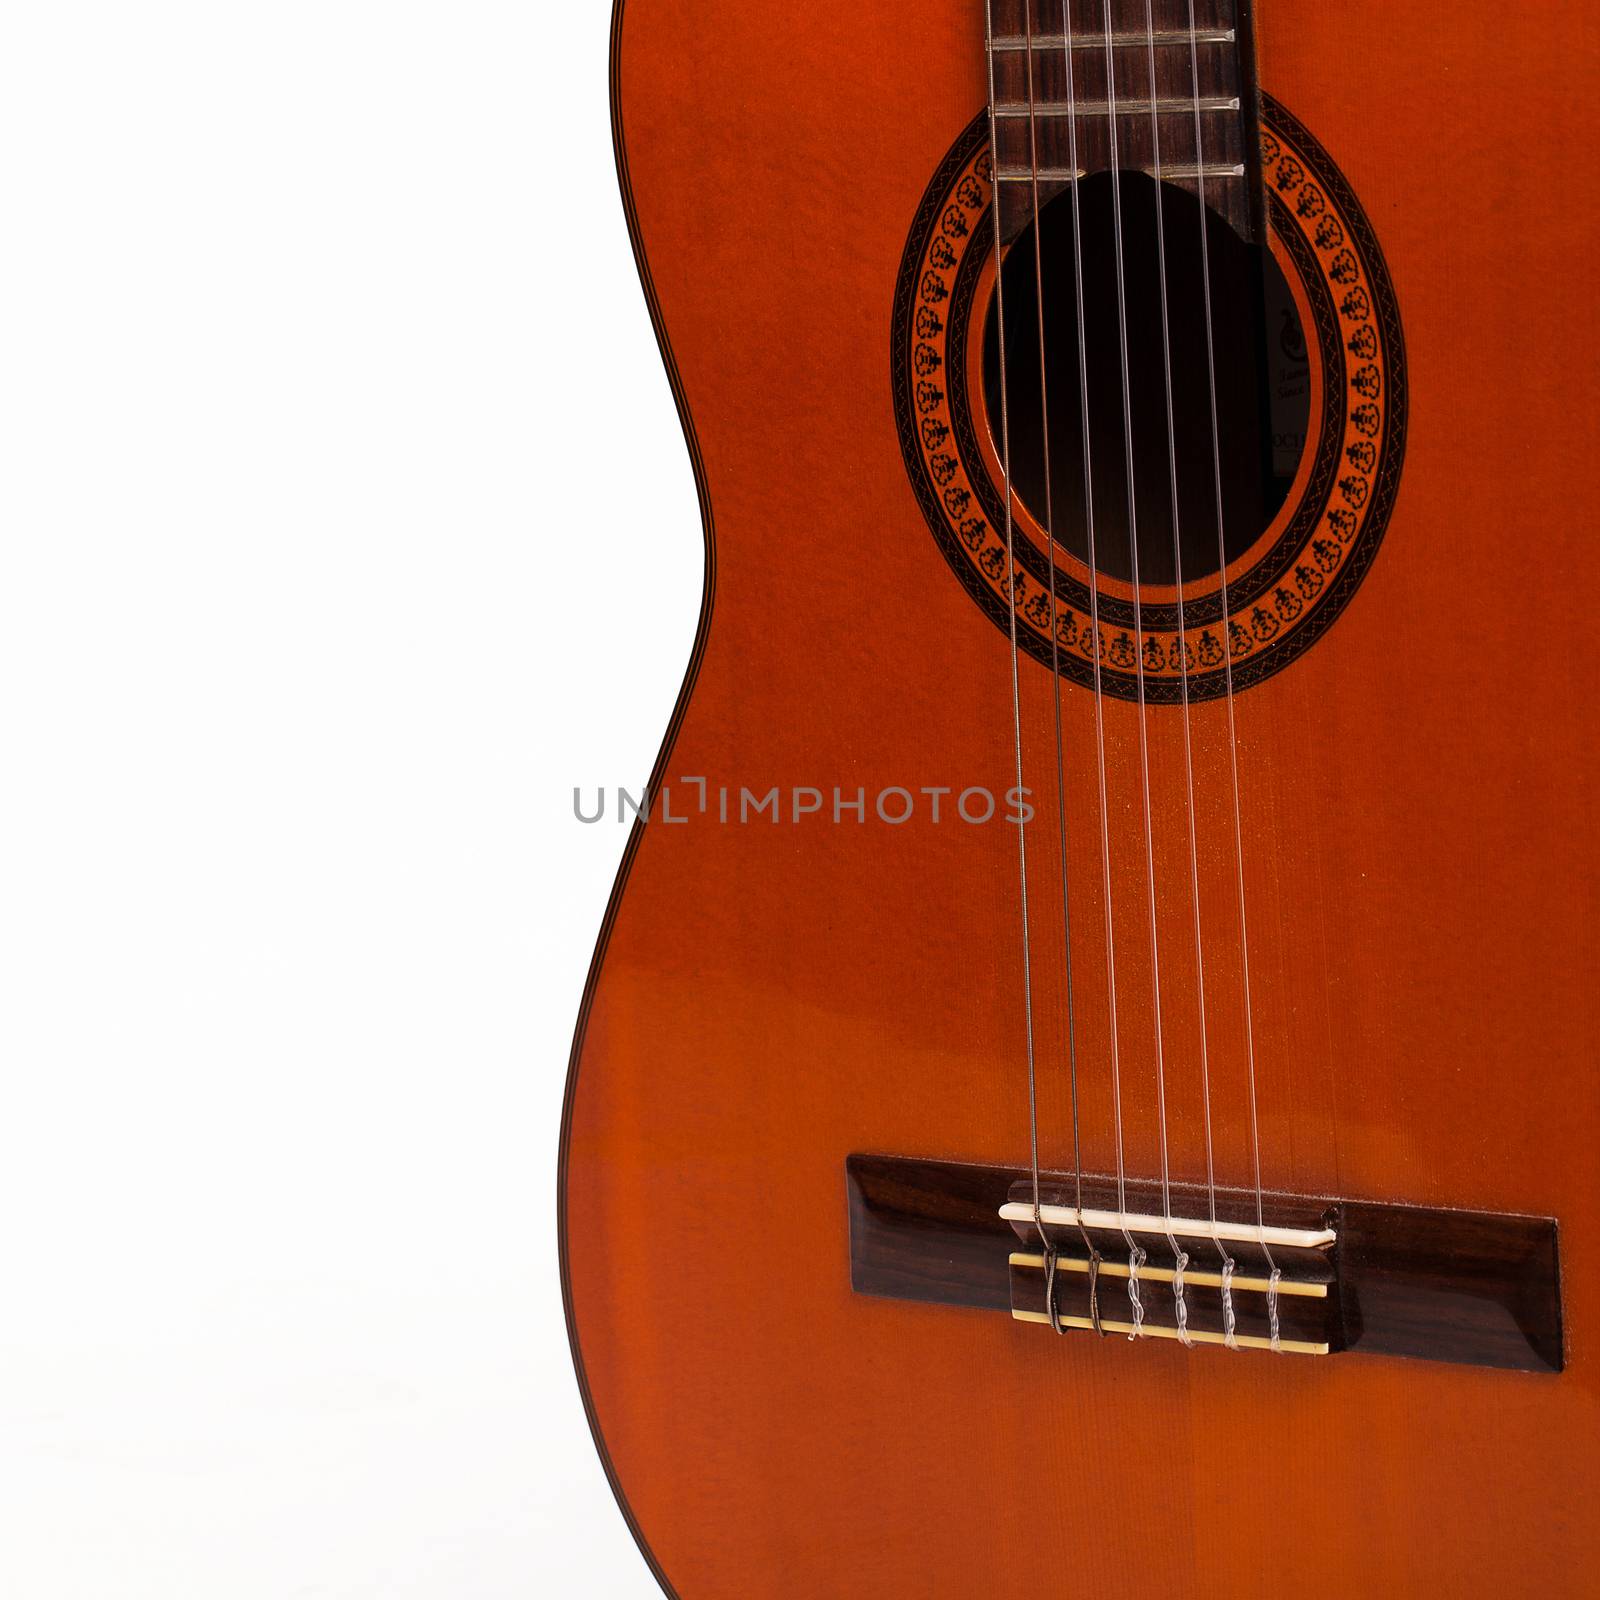 Old wooden brown guitar body over white background